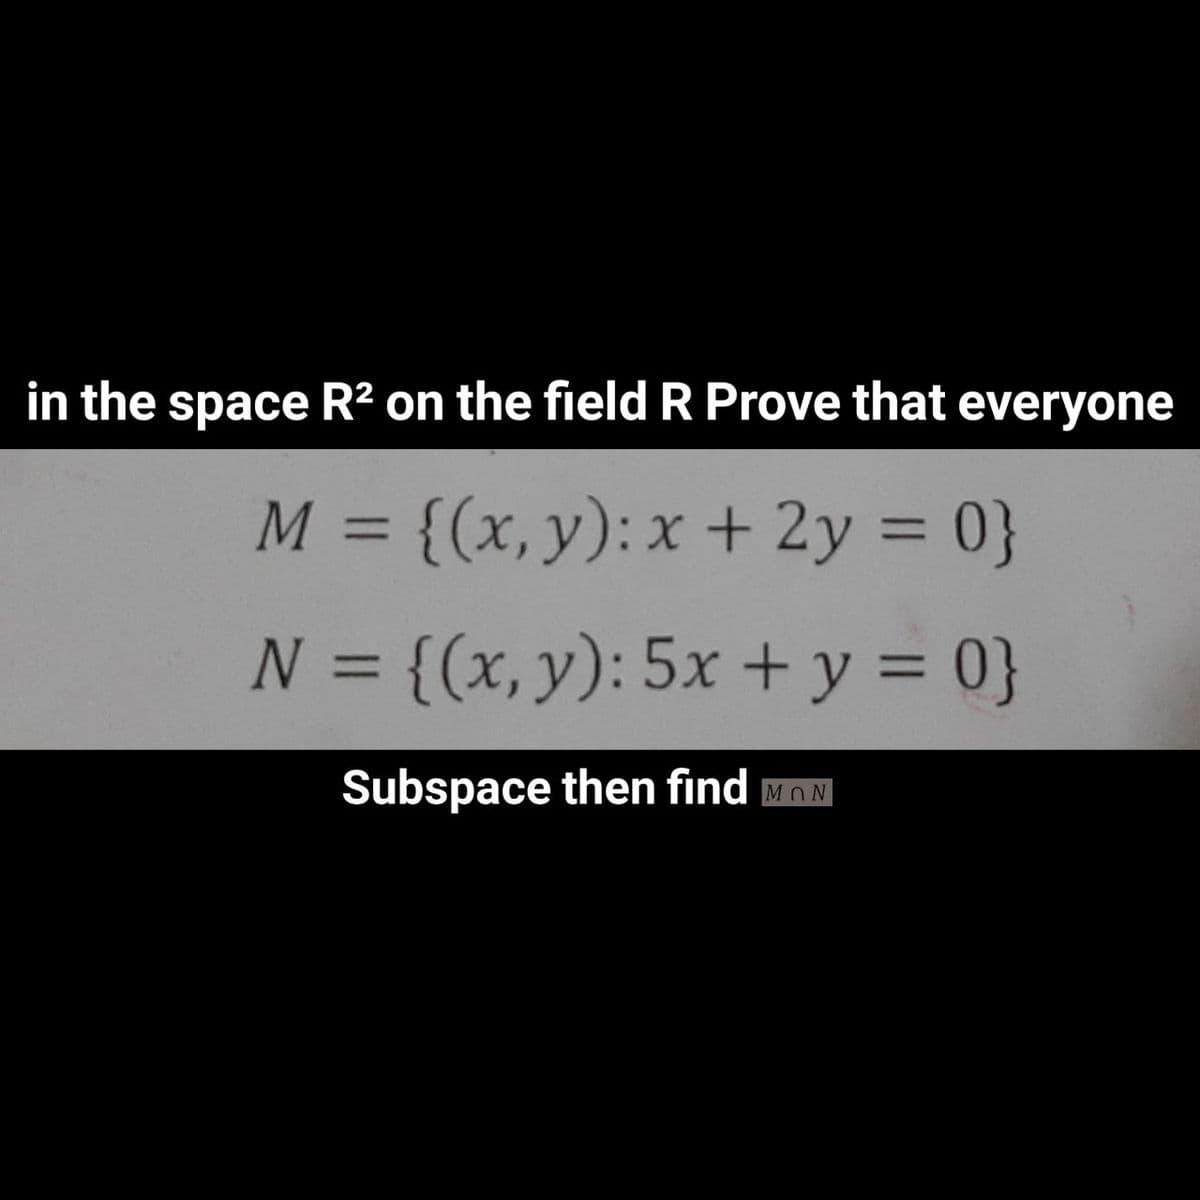 in the space R² on the field R Prove that everyone
M = {(x,y): x + 2y = 0}
%3D
%3D
N = {(x, y): 5x + y = 0}
%3D
%3D
Subspace then find MON
